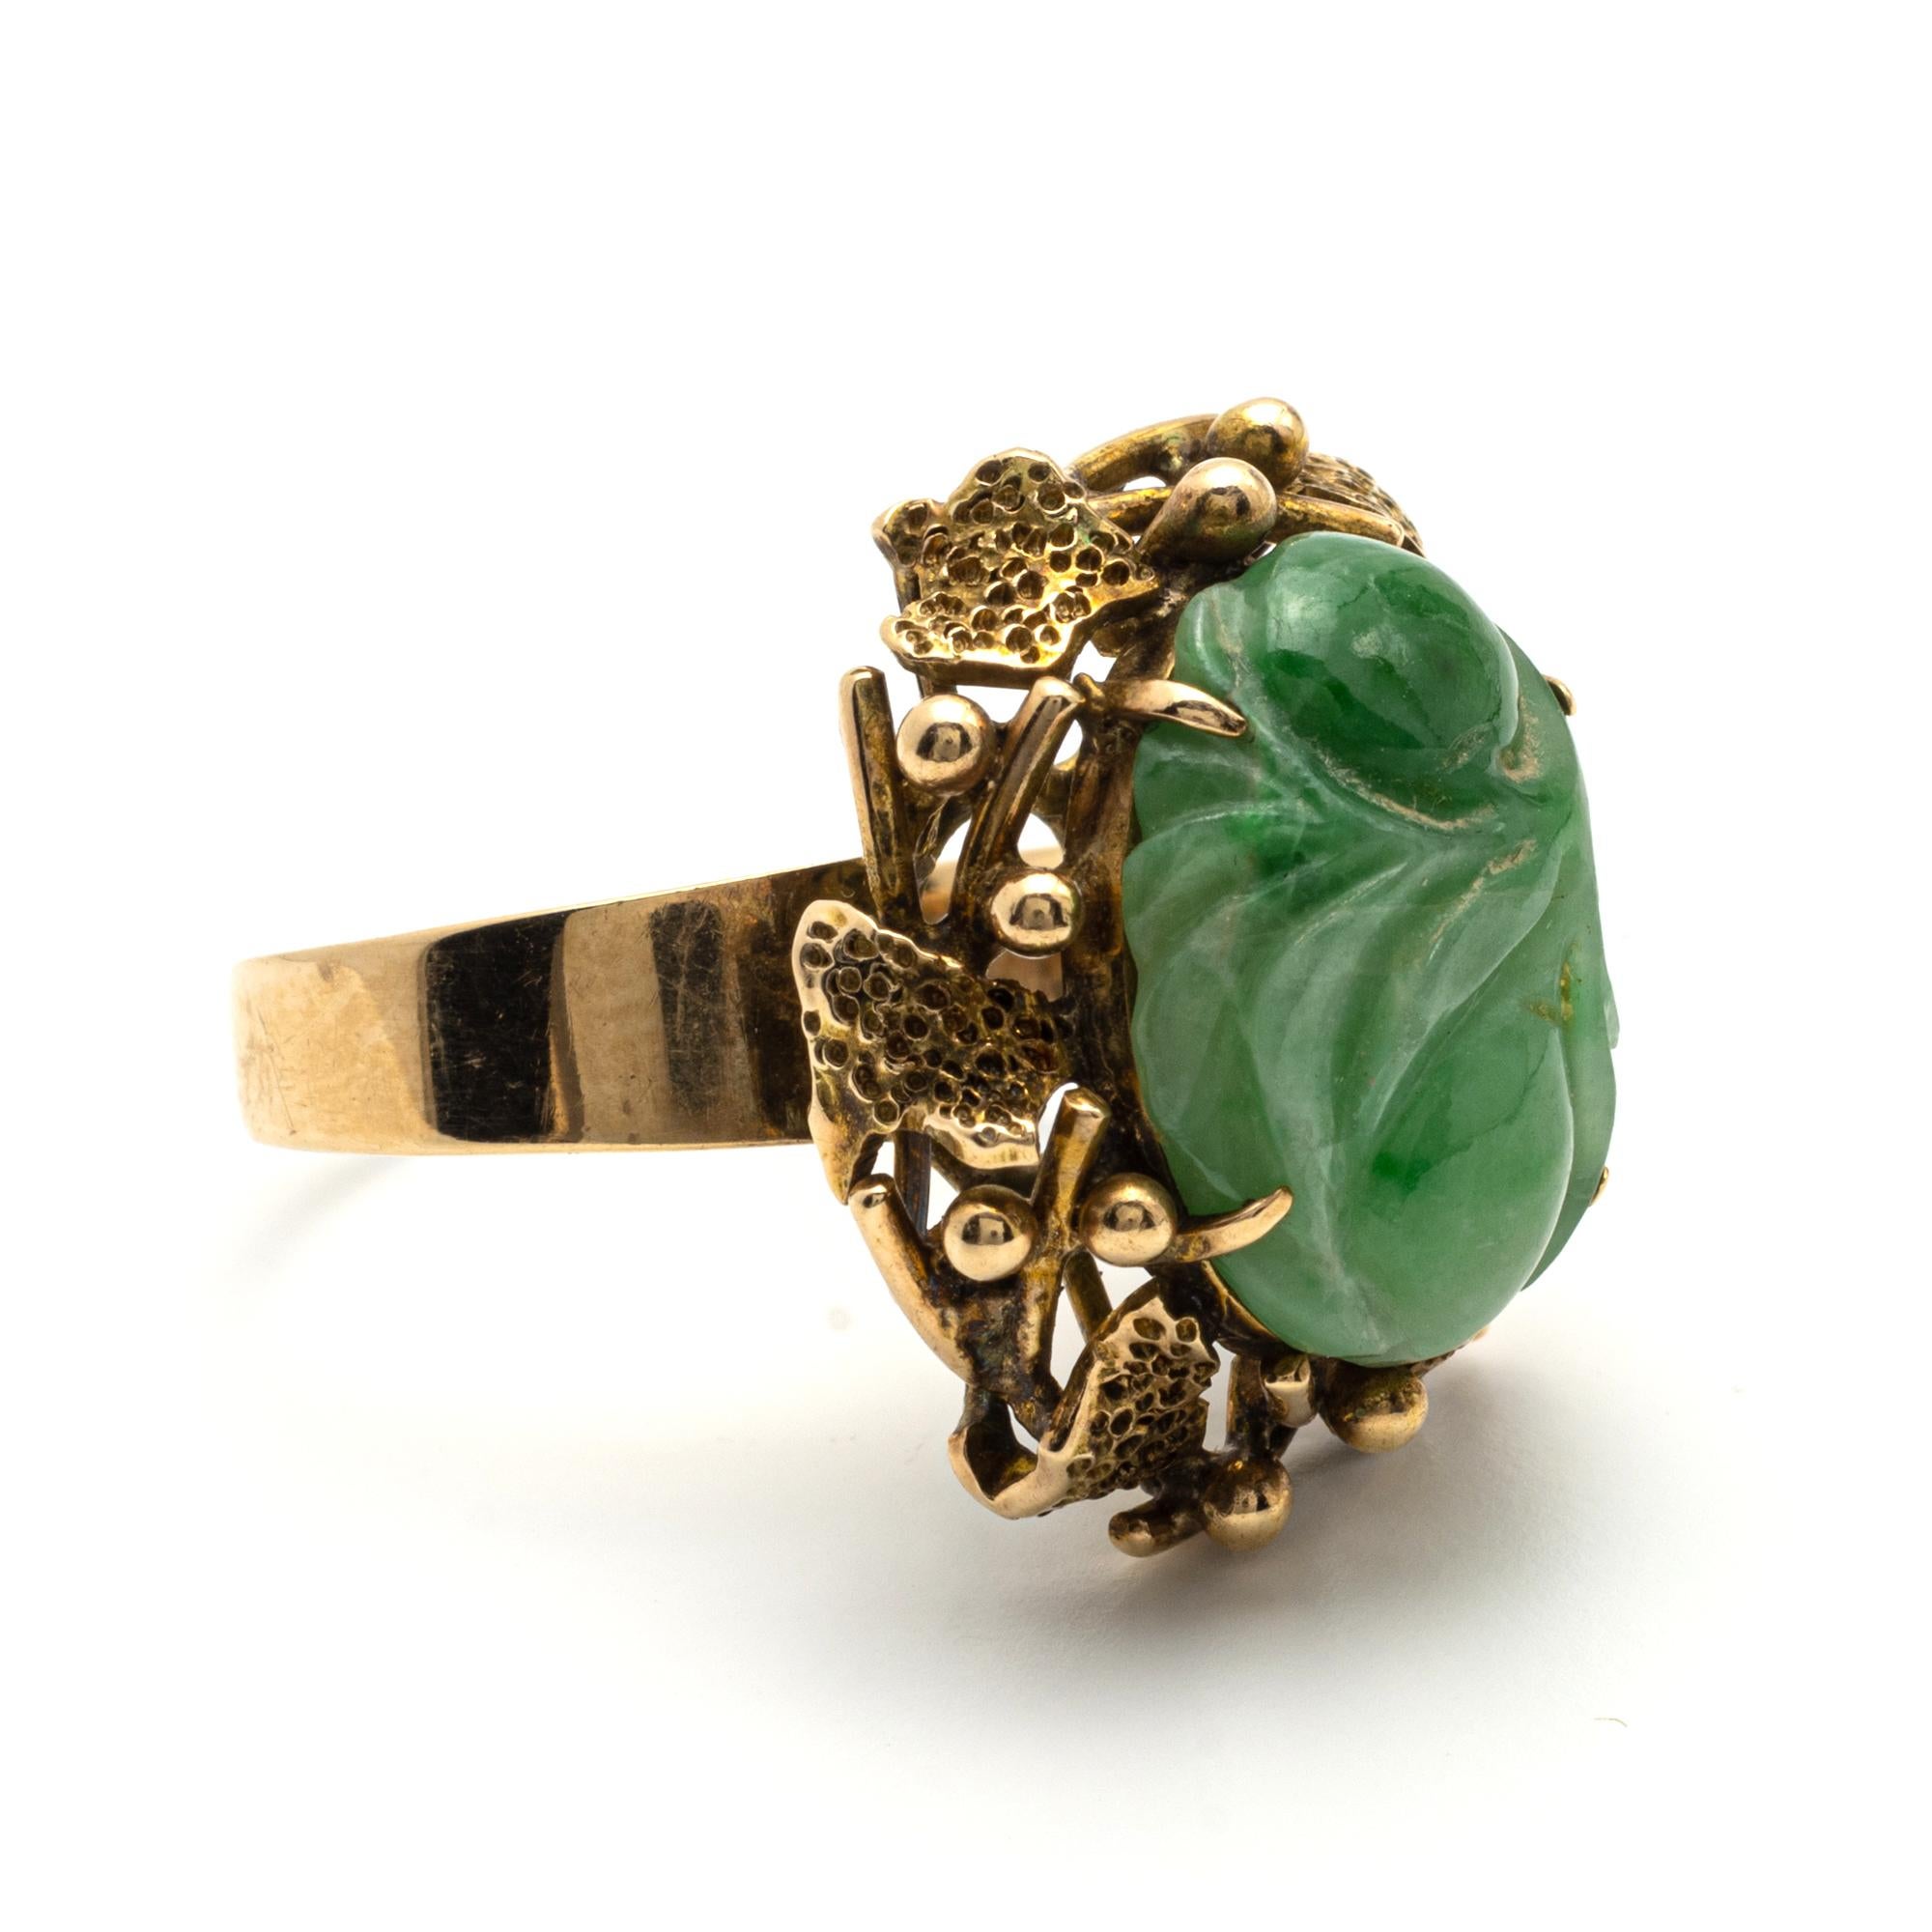 
Gold and Jade Ring
Set at the center with carved jade of foliate motif, mounted in yellow gold, size 8
